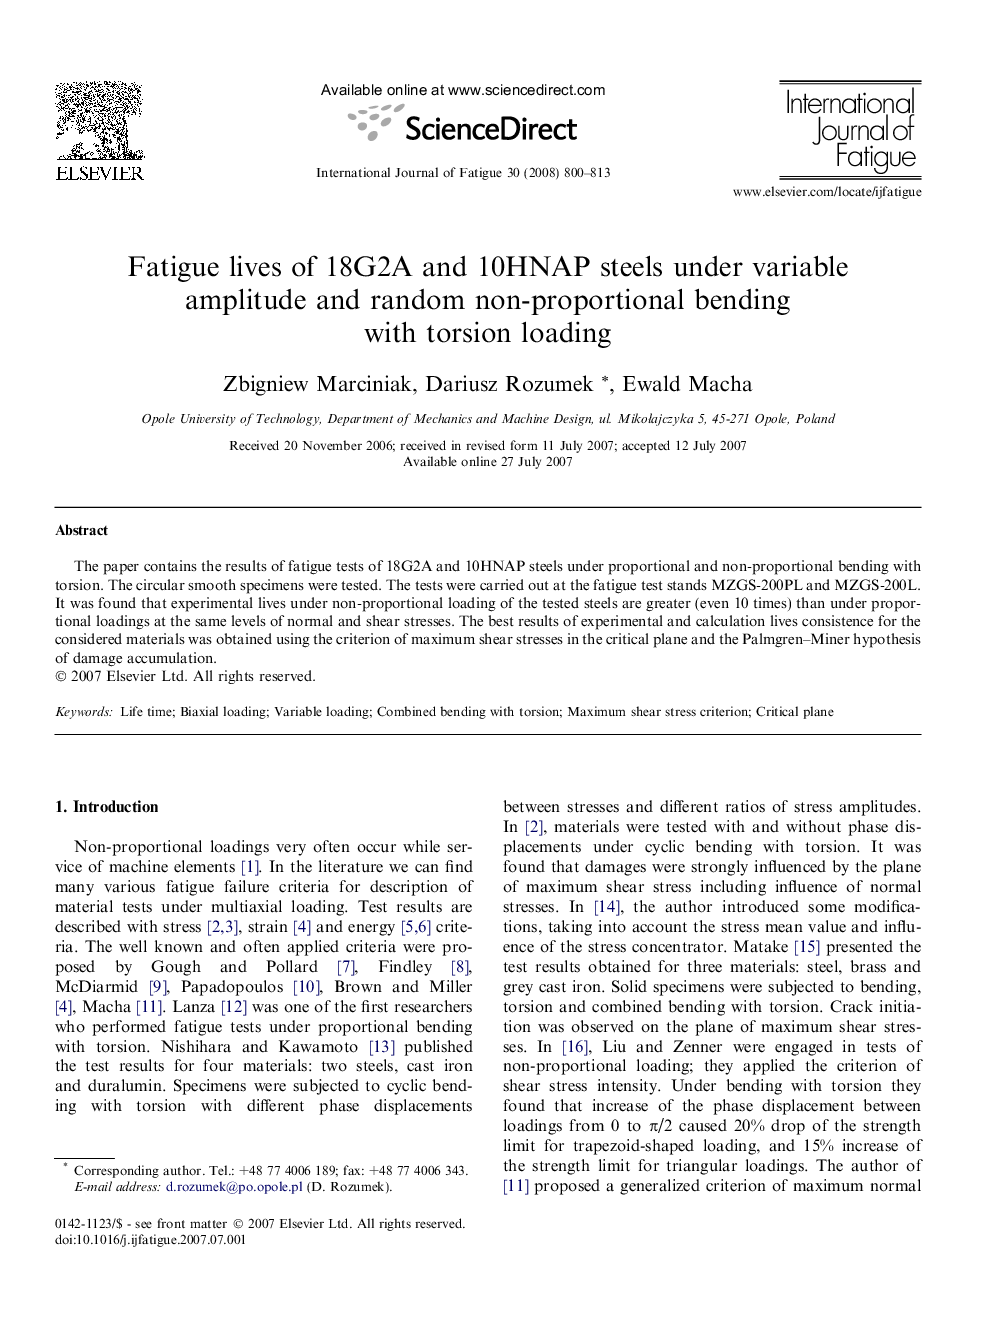 Fatigue lives of 18G2A and 10HNAP steels under variable amplitude and random non-proportional bending with torsion loading